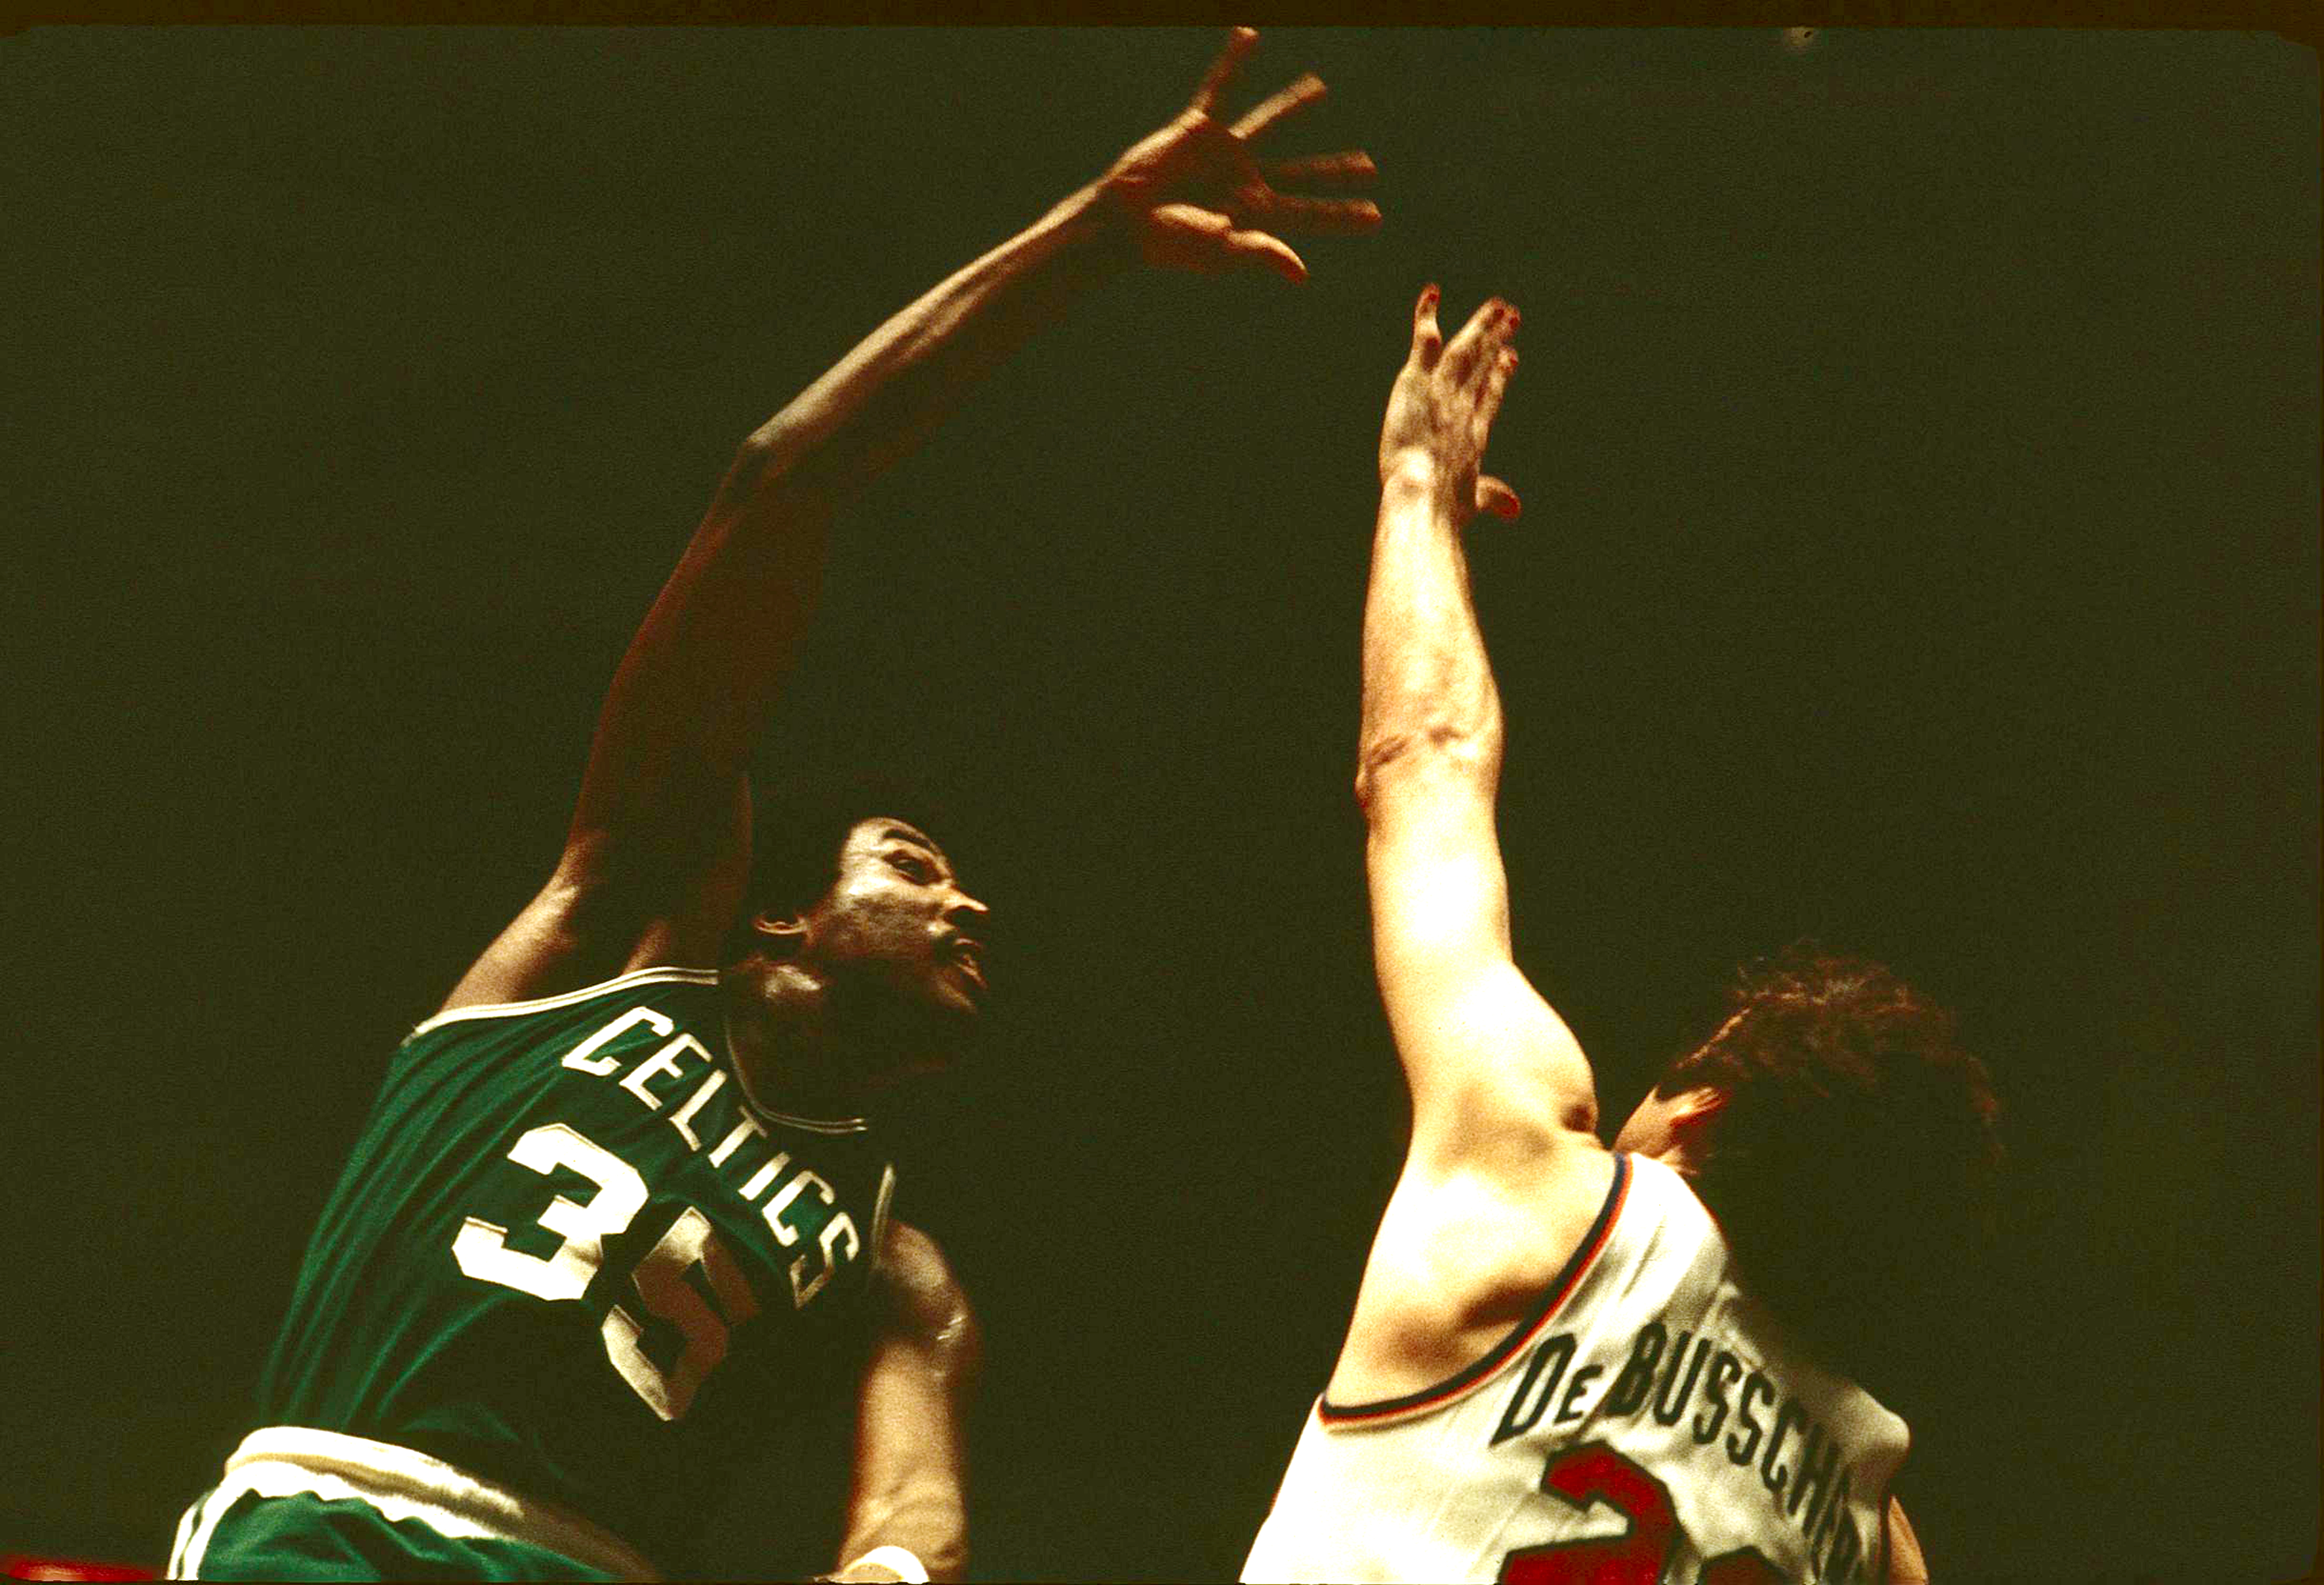 Paul Silas of the Boston Celtics, shoots while being guarded by Dave DeBusschere of the New York Knicks